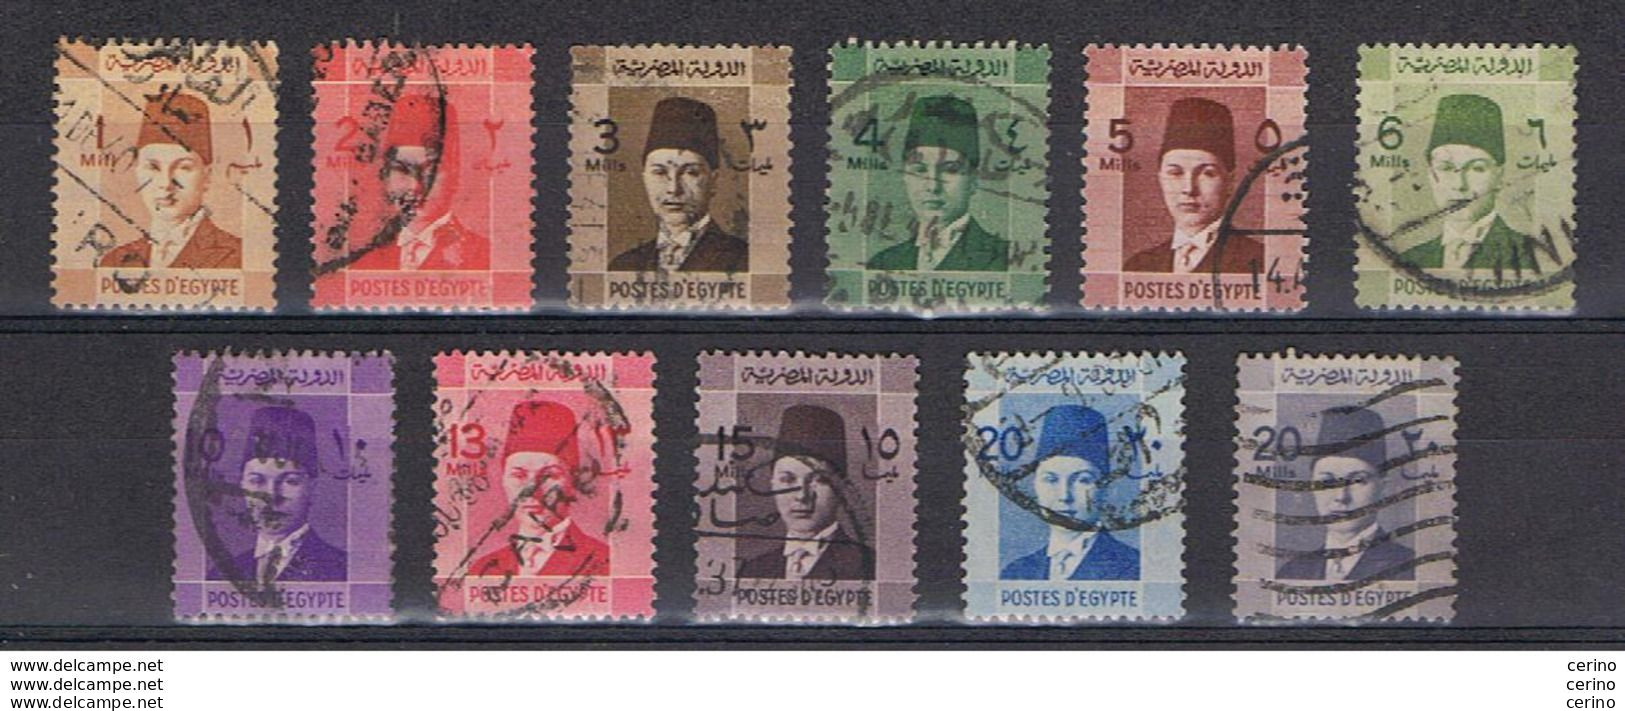 EGYPT:  1937/44  FAROUK  -  KOMPLET  SET  11  USED  STAMPS  -  YV/TELL. 187/95 A - Used Stamps